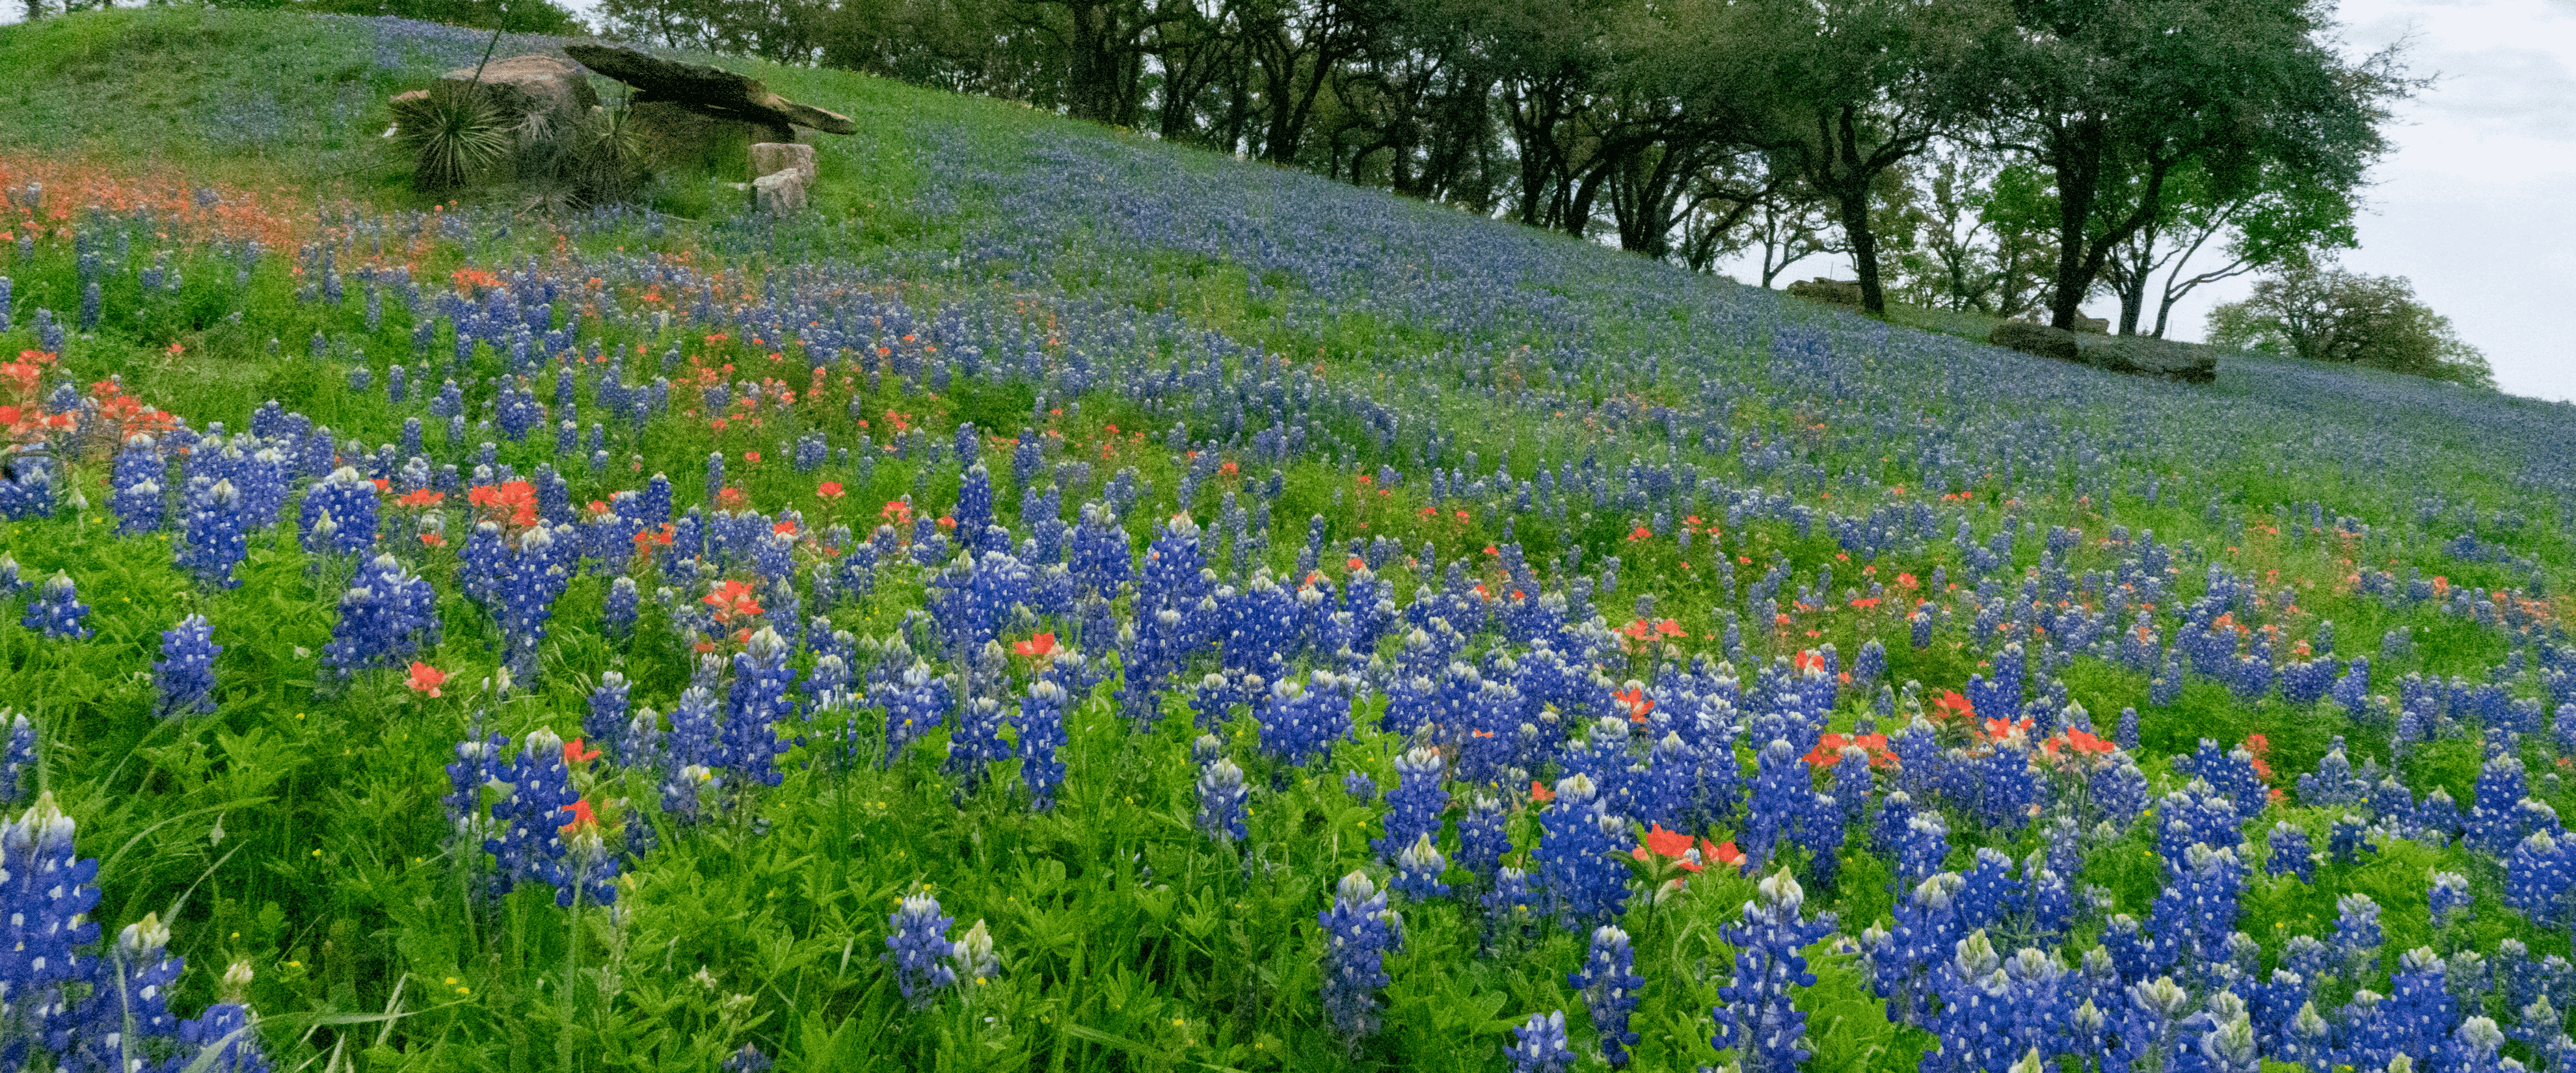 A sloping field filled with bluebonnets.